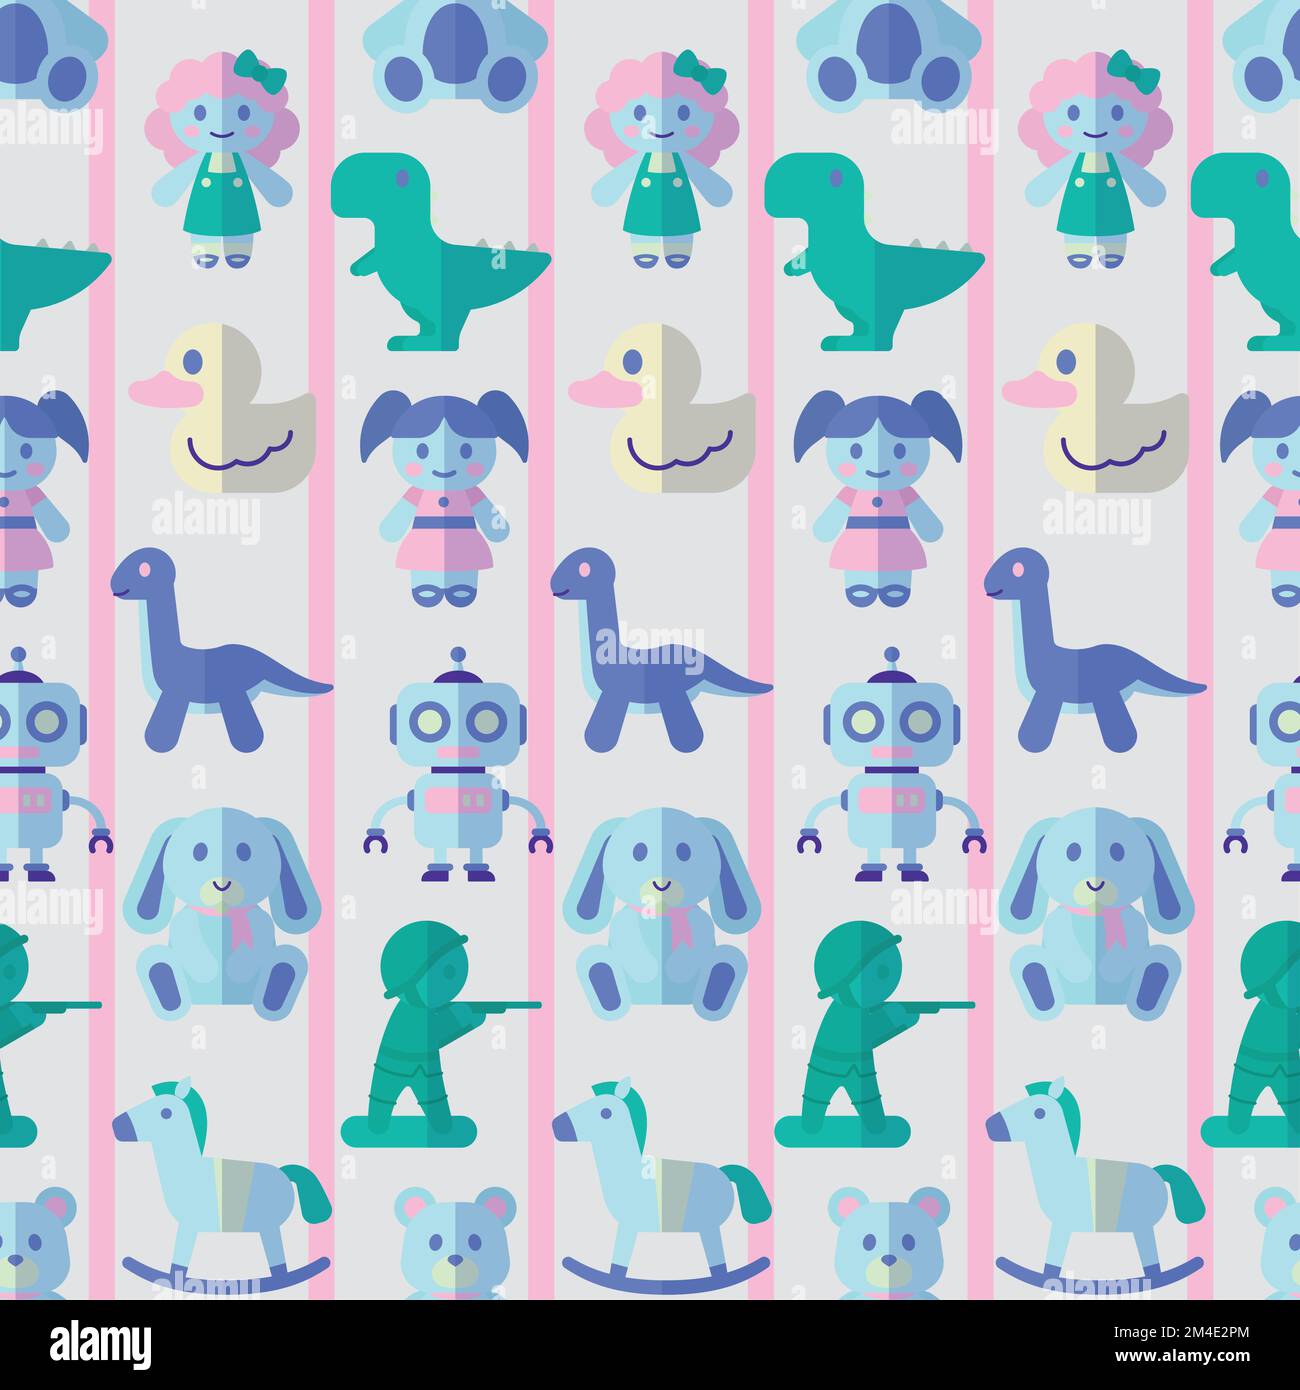 Seamless pattern background with toy icons Vector Stock Vector